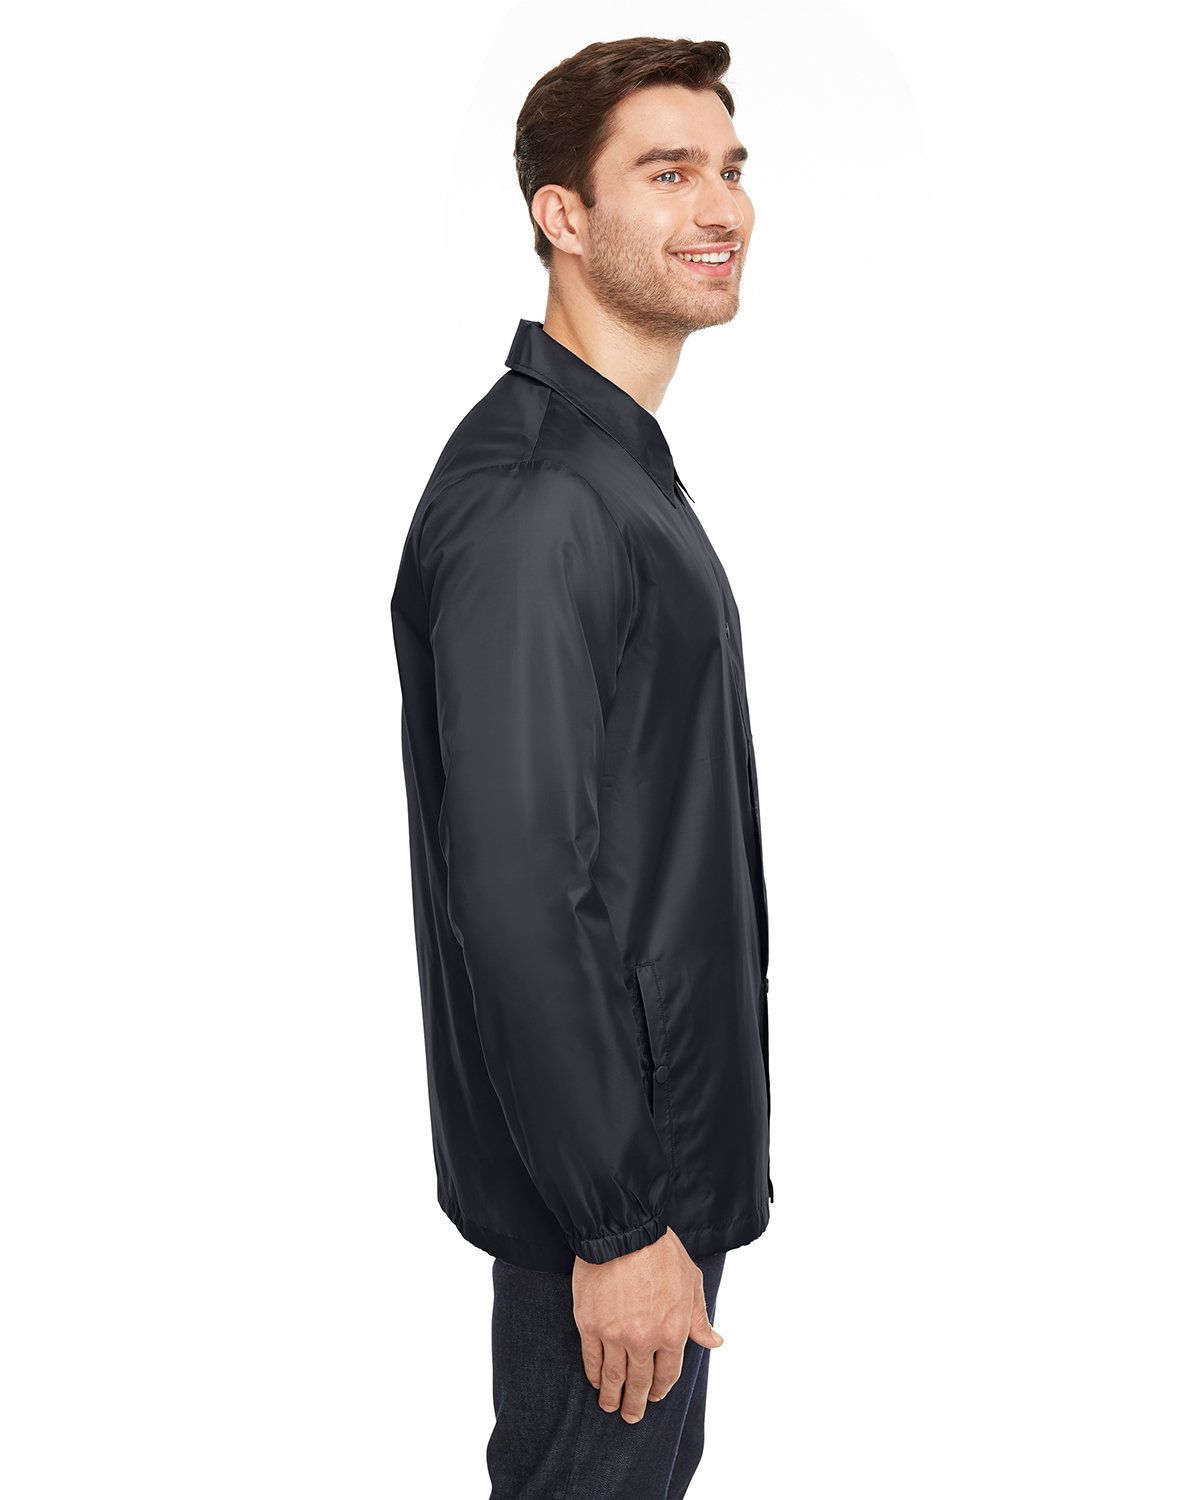 'Team 365 TT75 Adult Zone Protect Coaches Jacket'